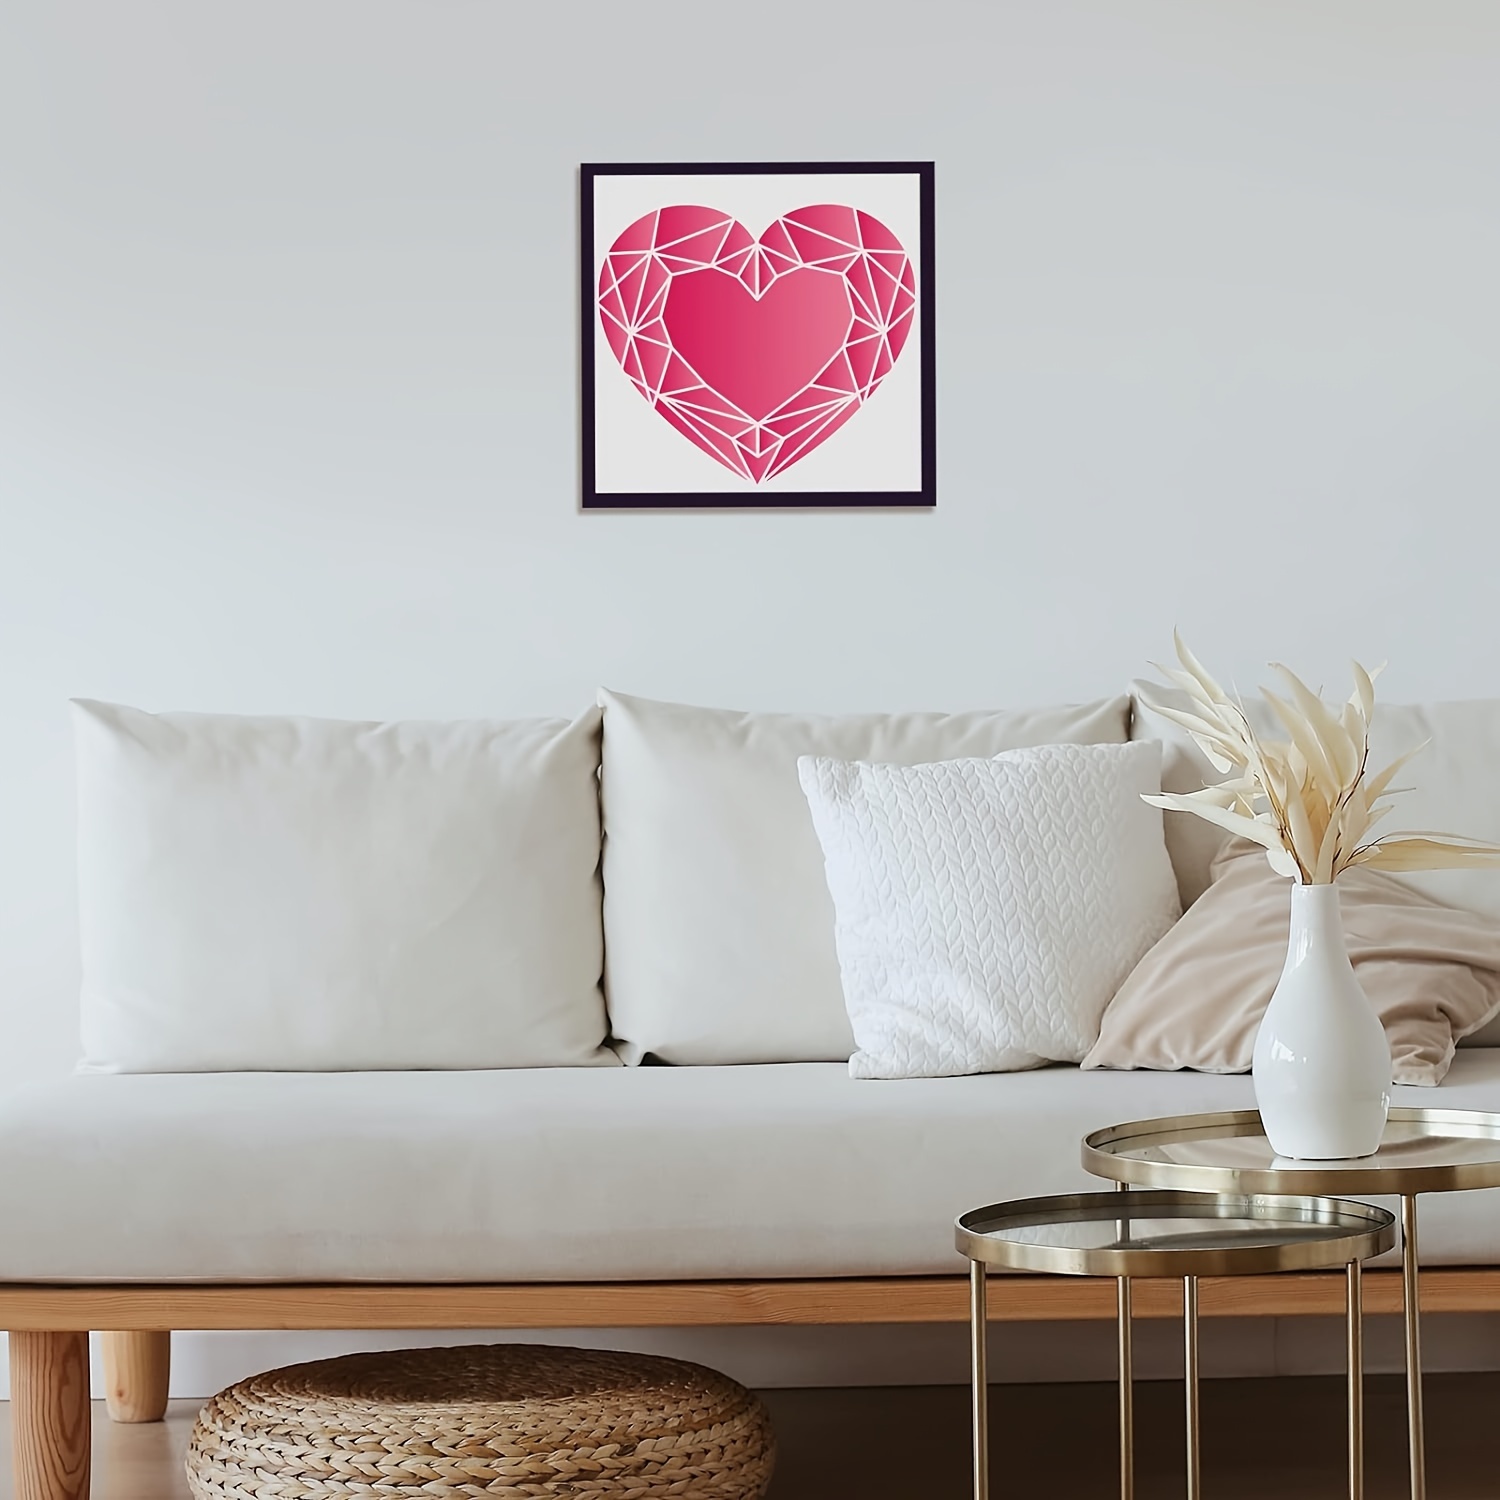 Love Heart Stencils Template 11.8x11.8inch Plastic Mandala Heart Drawing  Painting Stencils Square Reusable Stencils for Painting on Wood Floor Wall